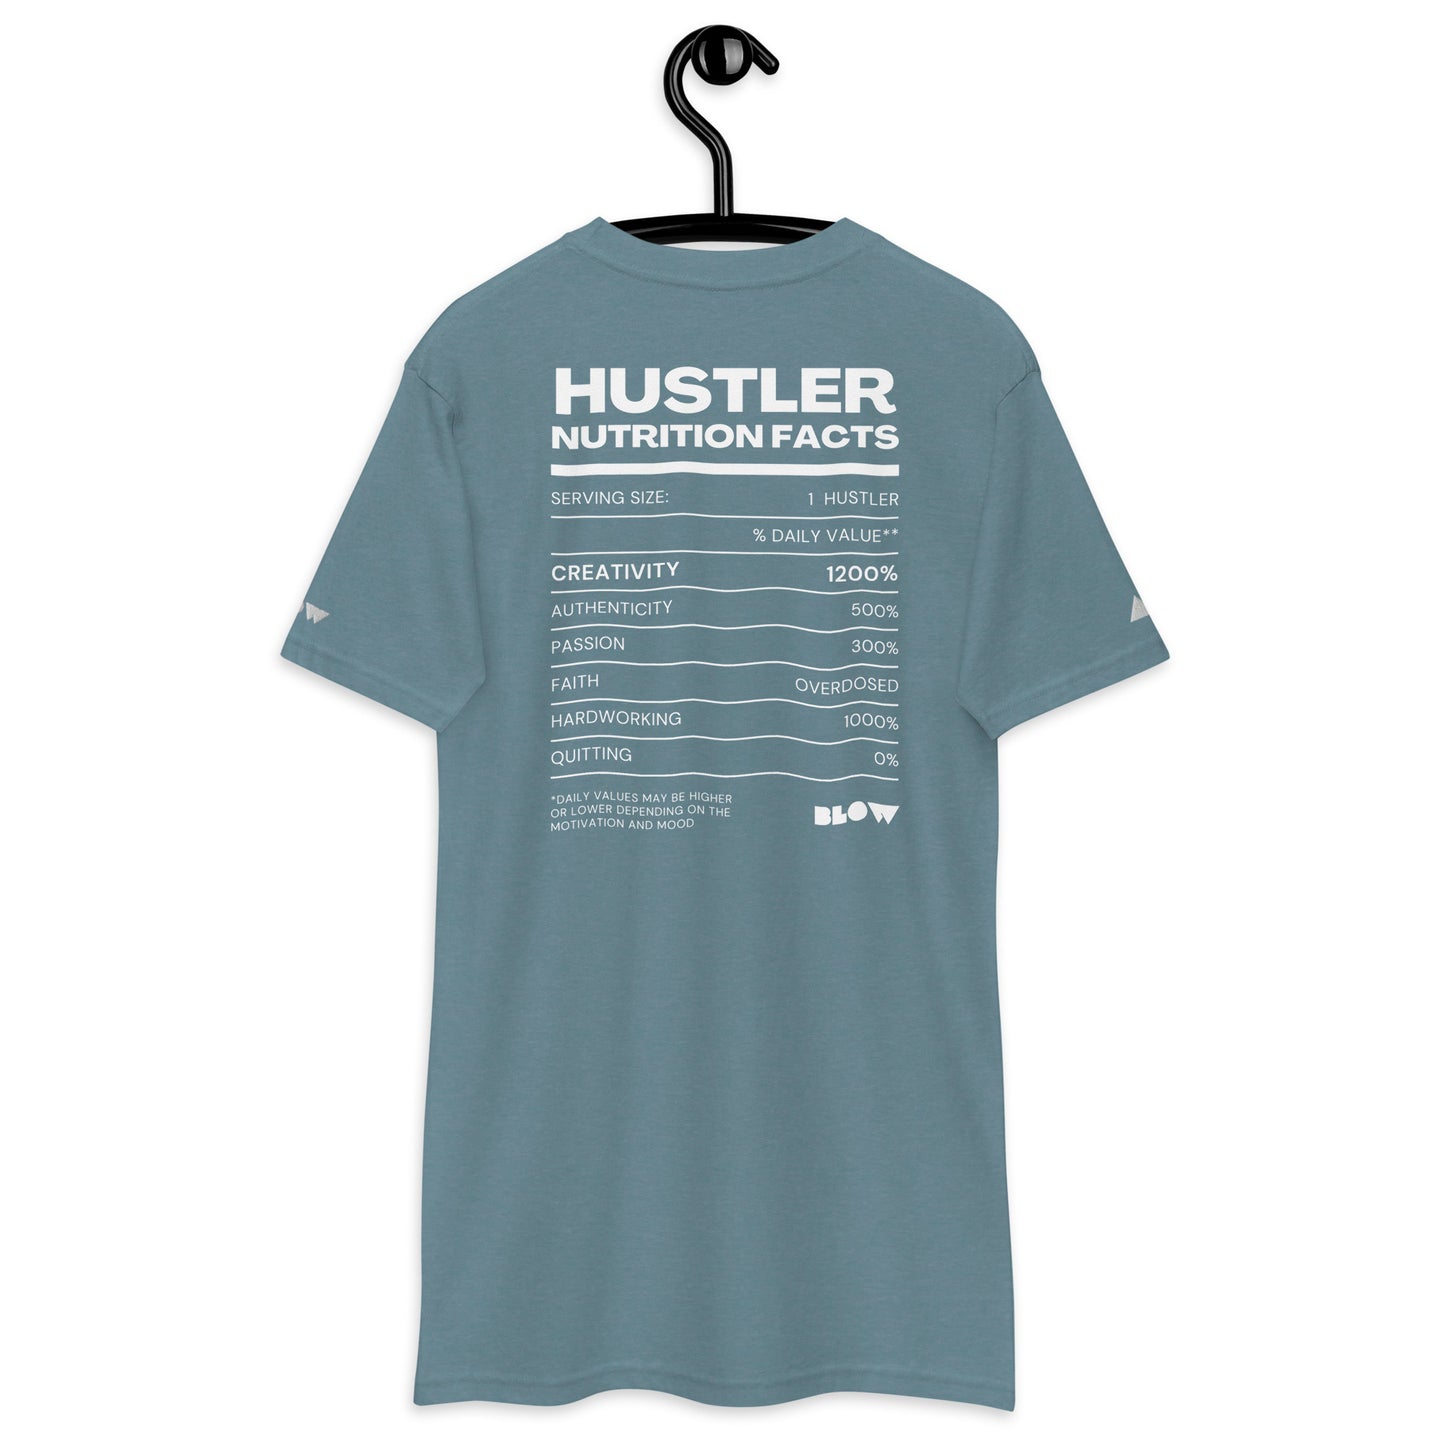 BLOW | LIMITED EDITION | HUSTLERS NUTRITIONAL FACTS | EMBROIDERED PREMIUM HEAVYWEIGHT T-SHIRT